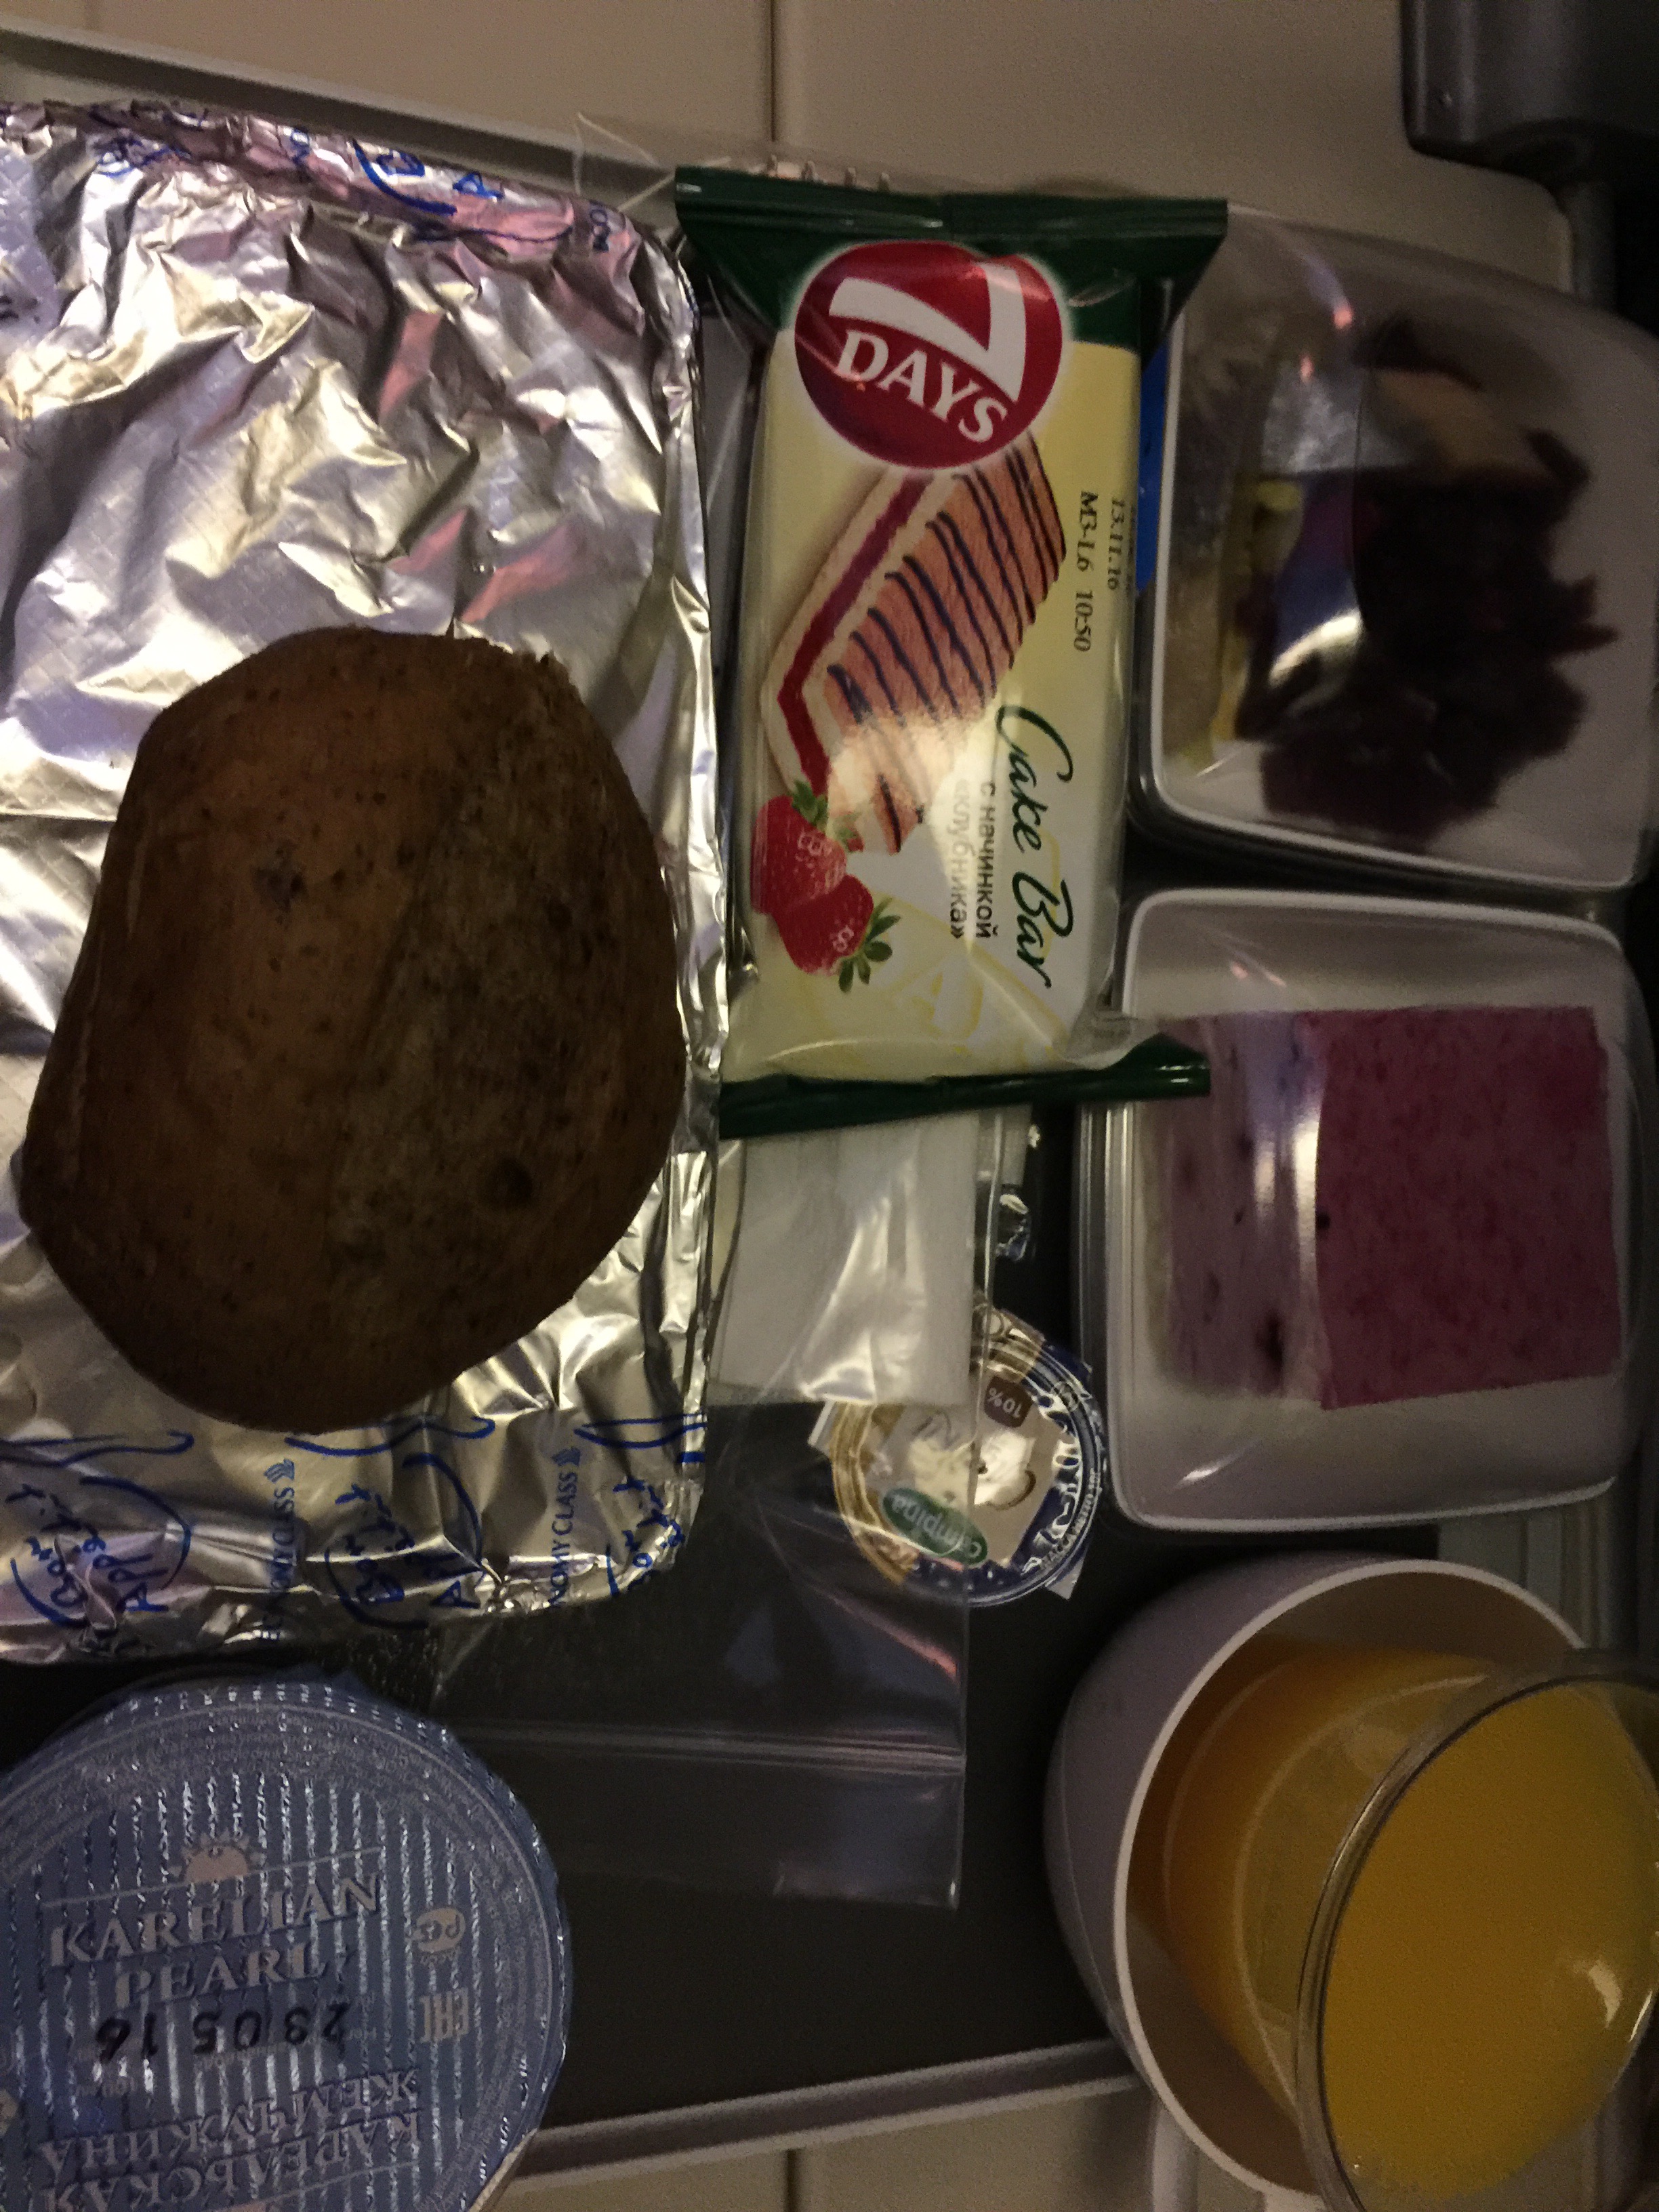 Many meals on plane! Russian cakes!!!